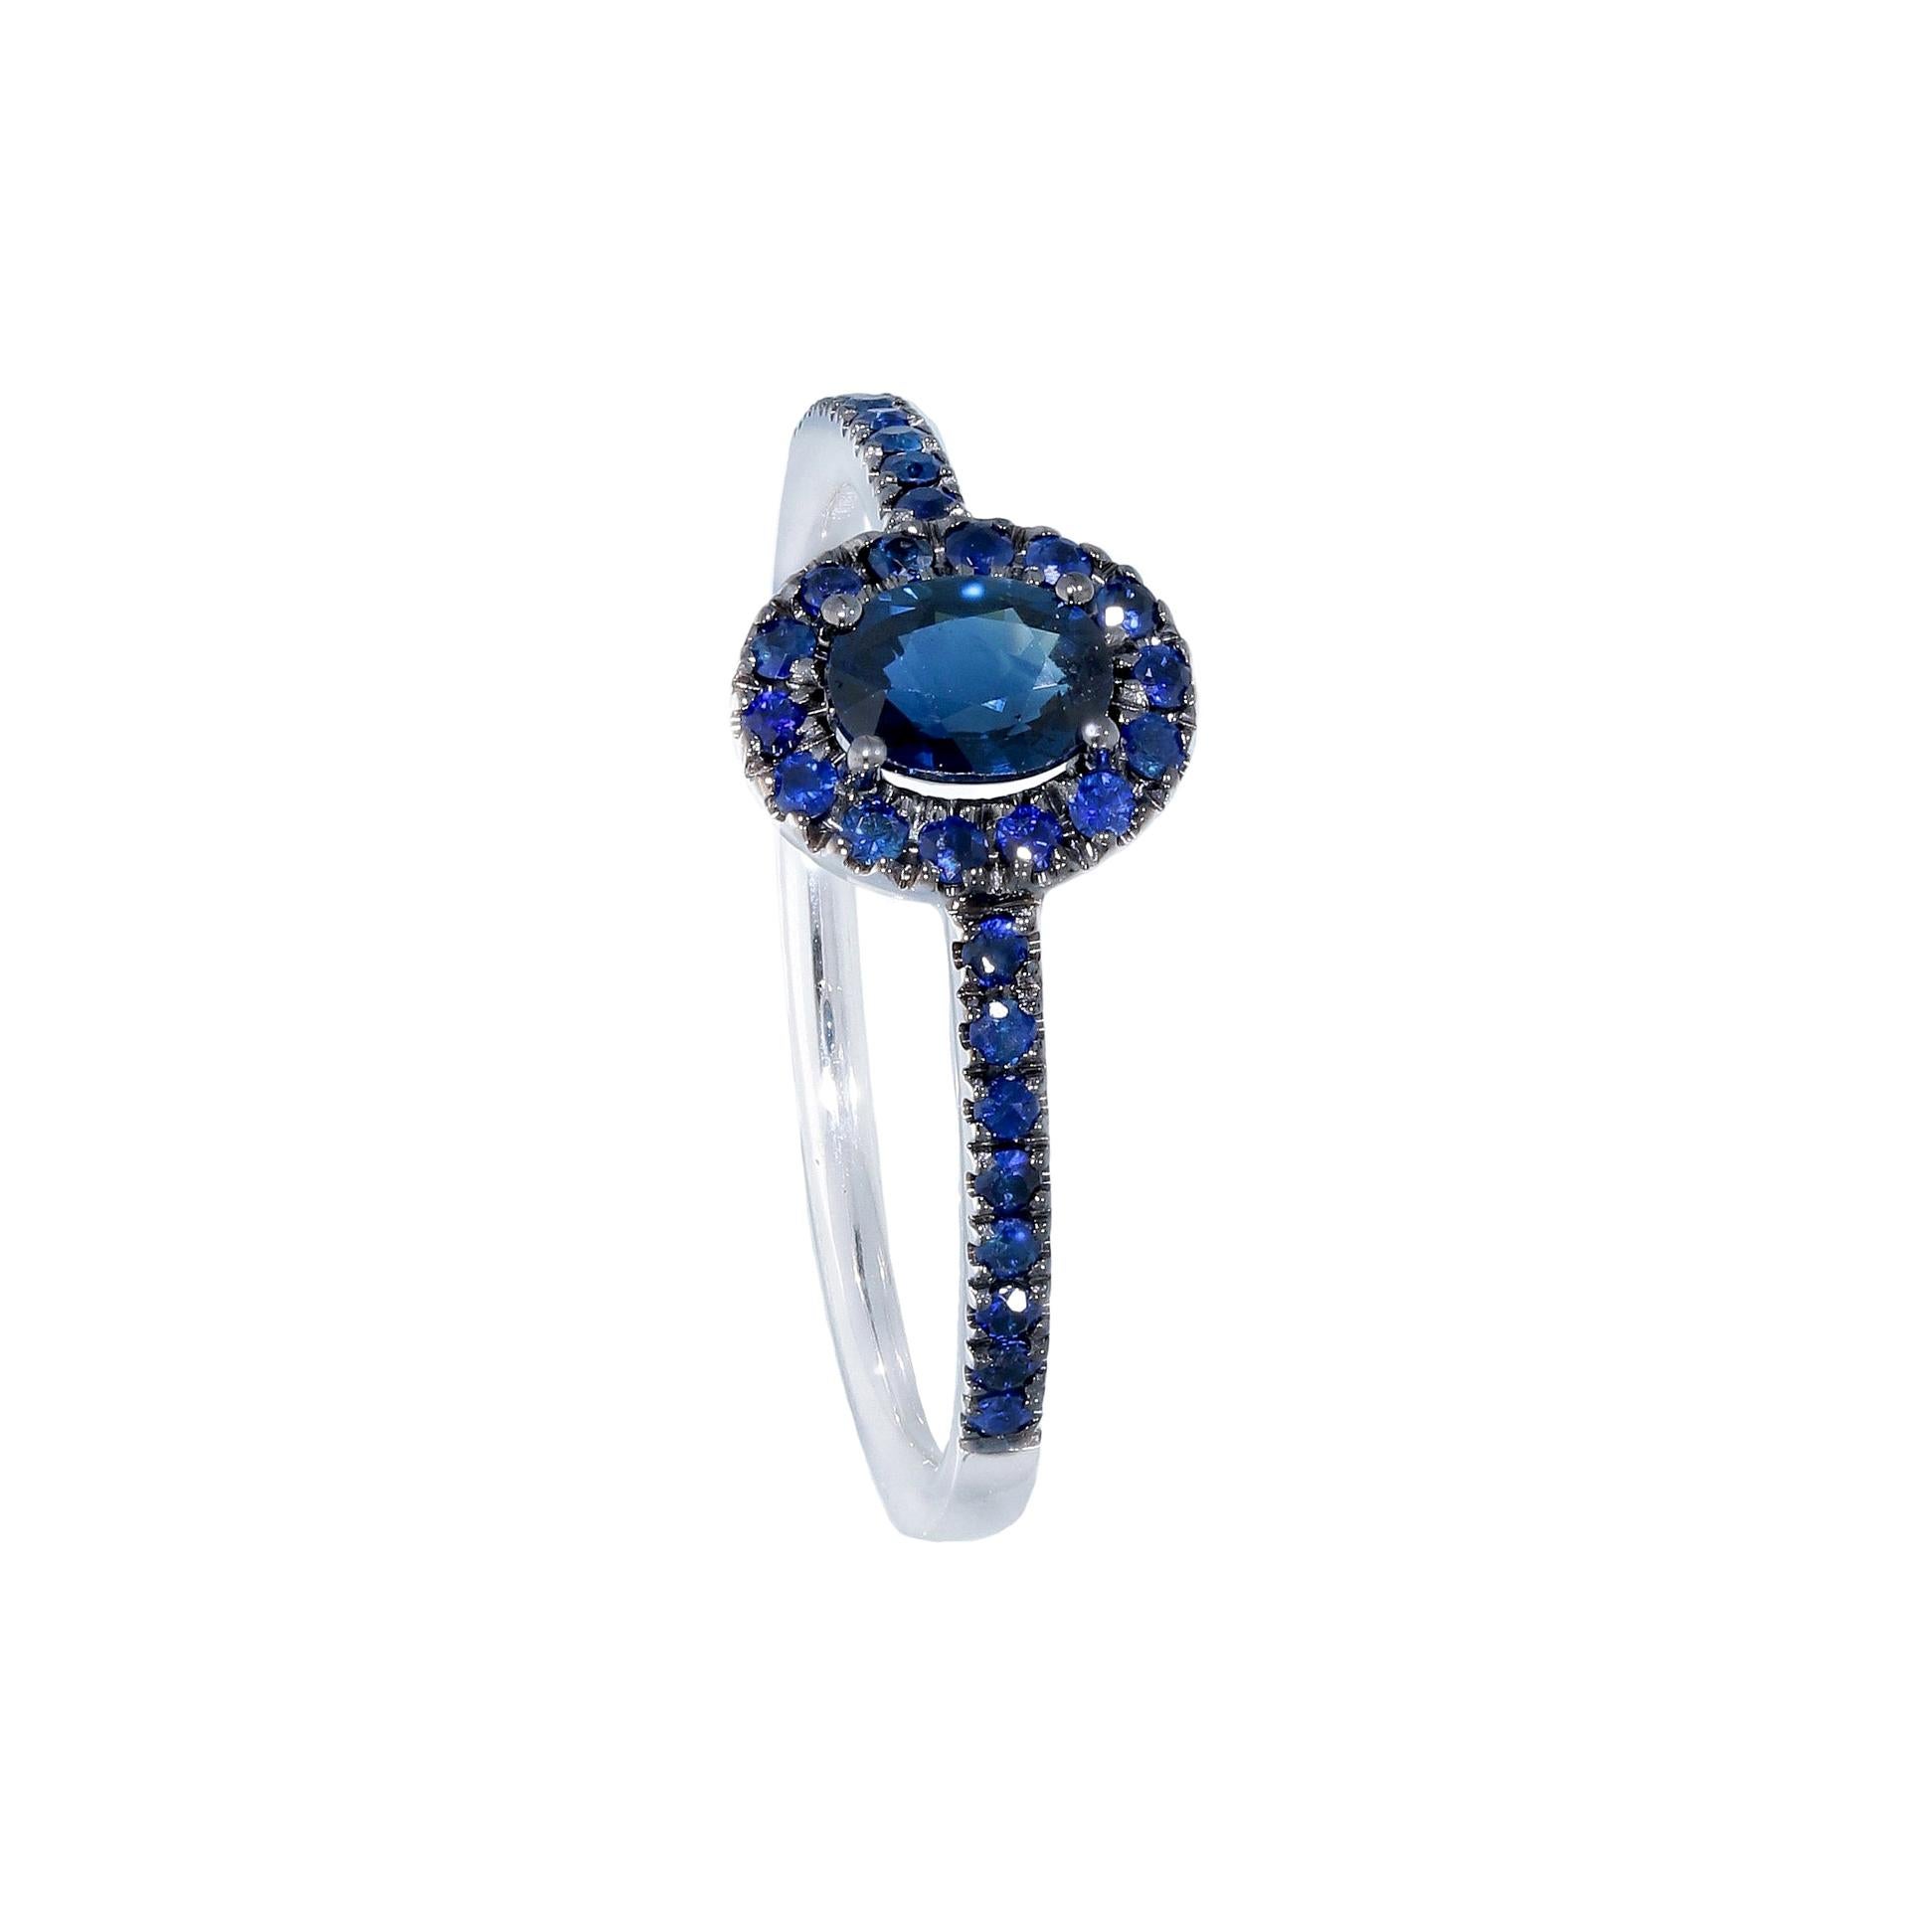 18k Black and White Golg Wedding Ring with Blue Sapphire